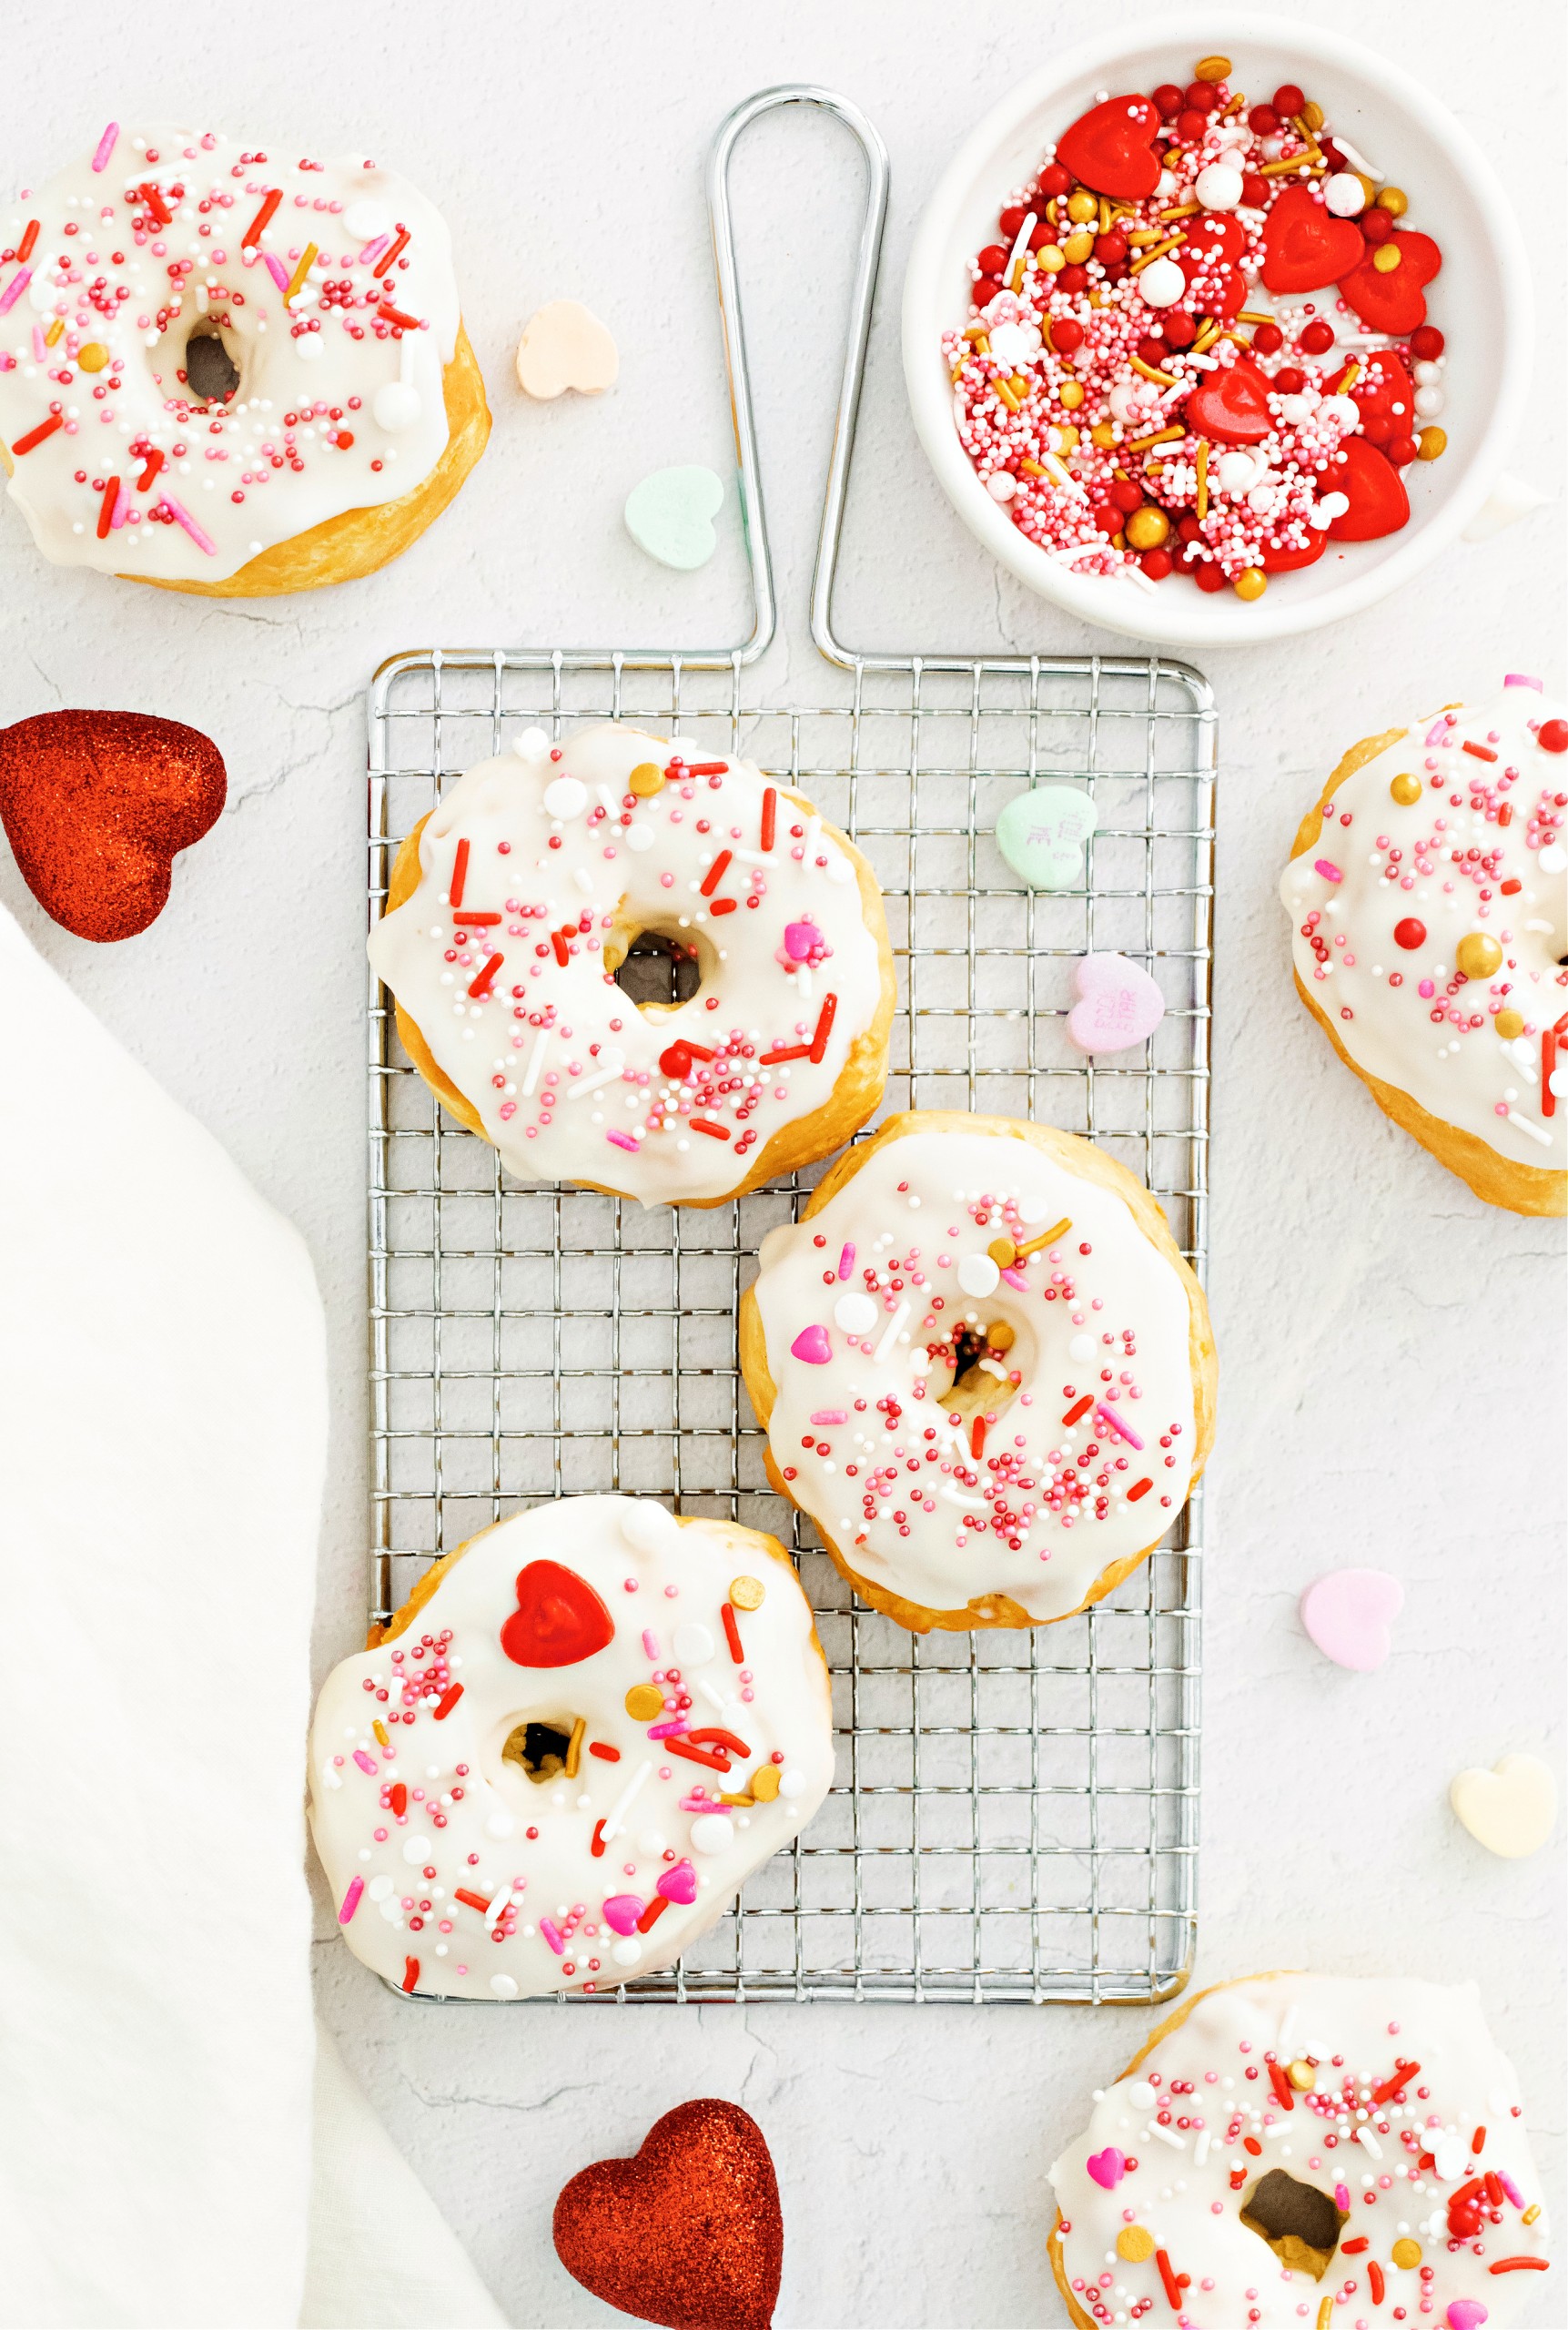 Donuts cooked in the air fryer